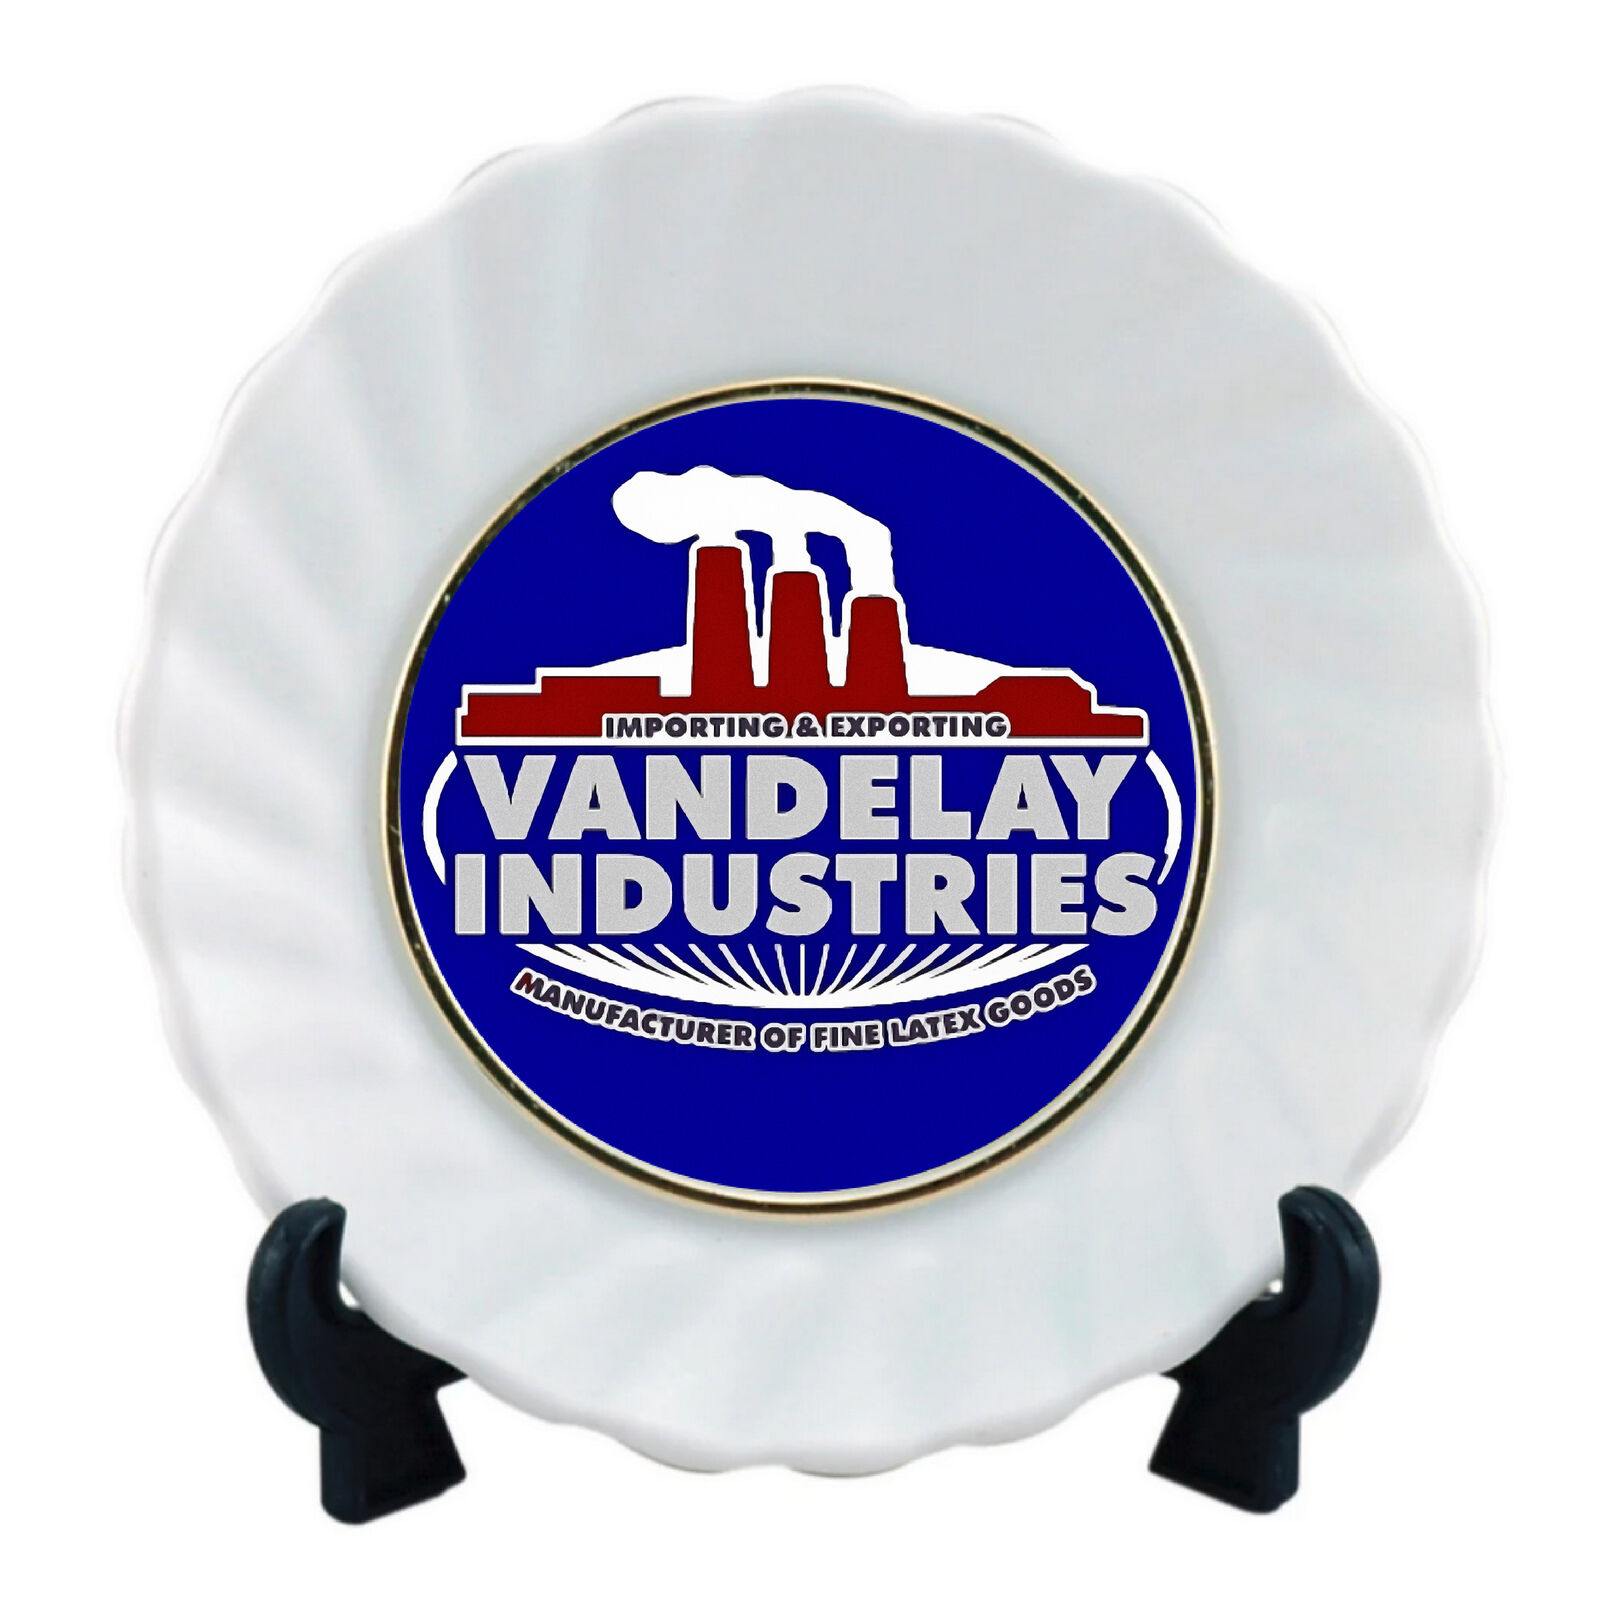 Vandelay Industries Seinfeld Ceramic Plate Limited Edition Numbered FREE stand